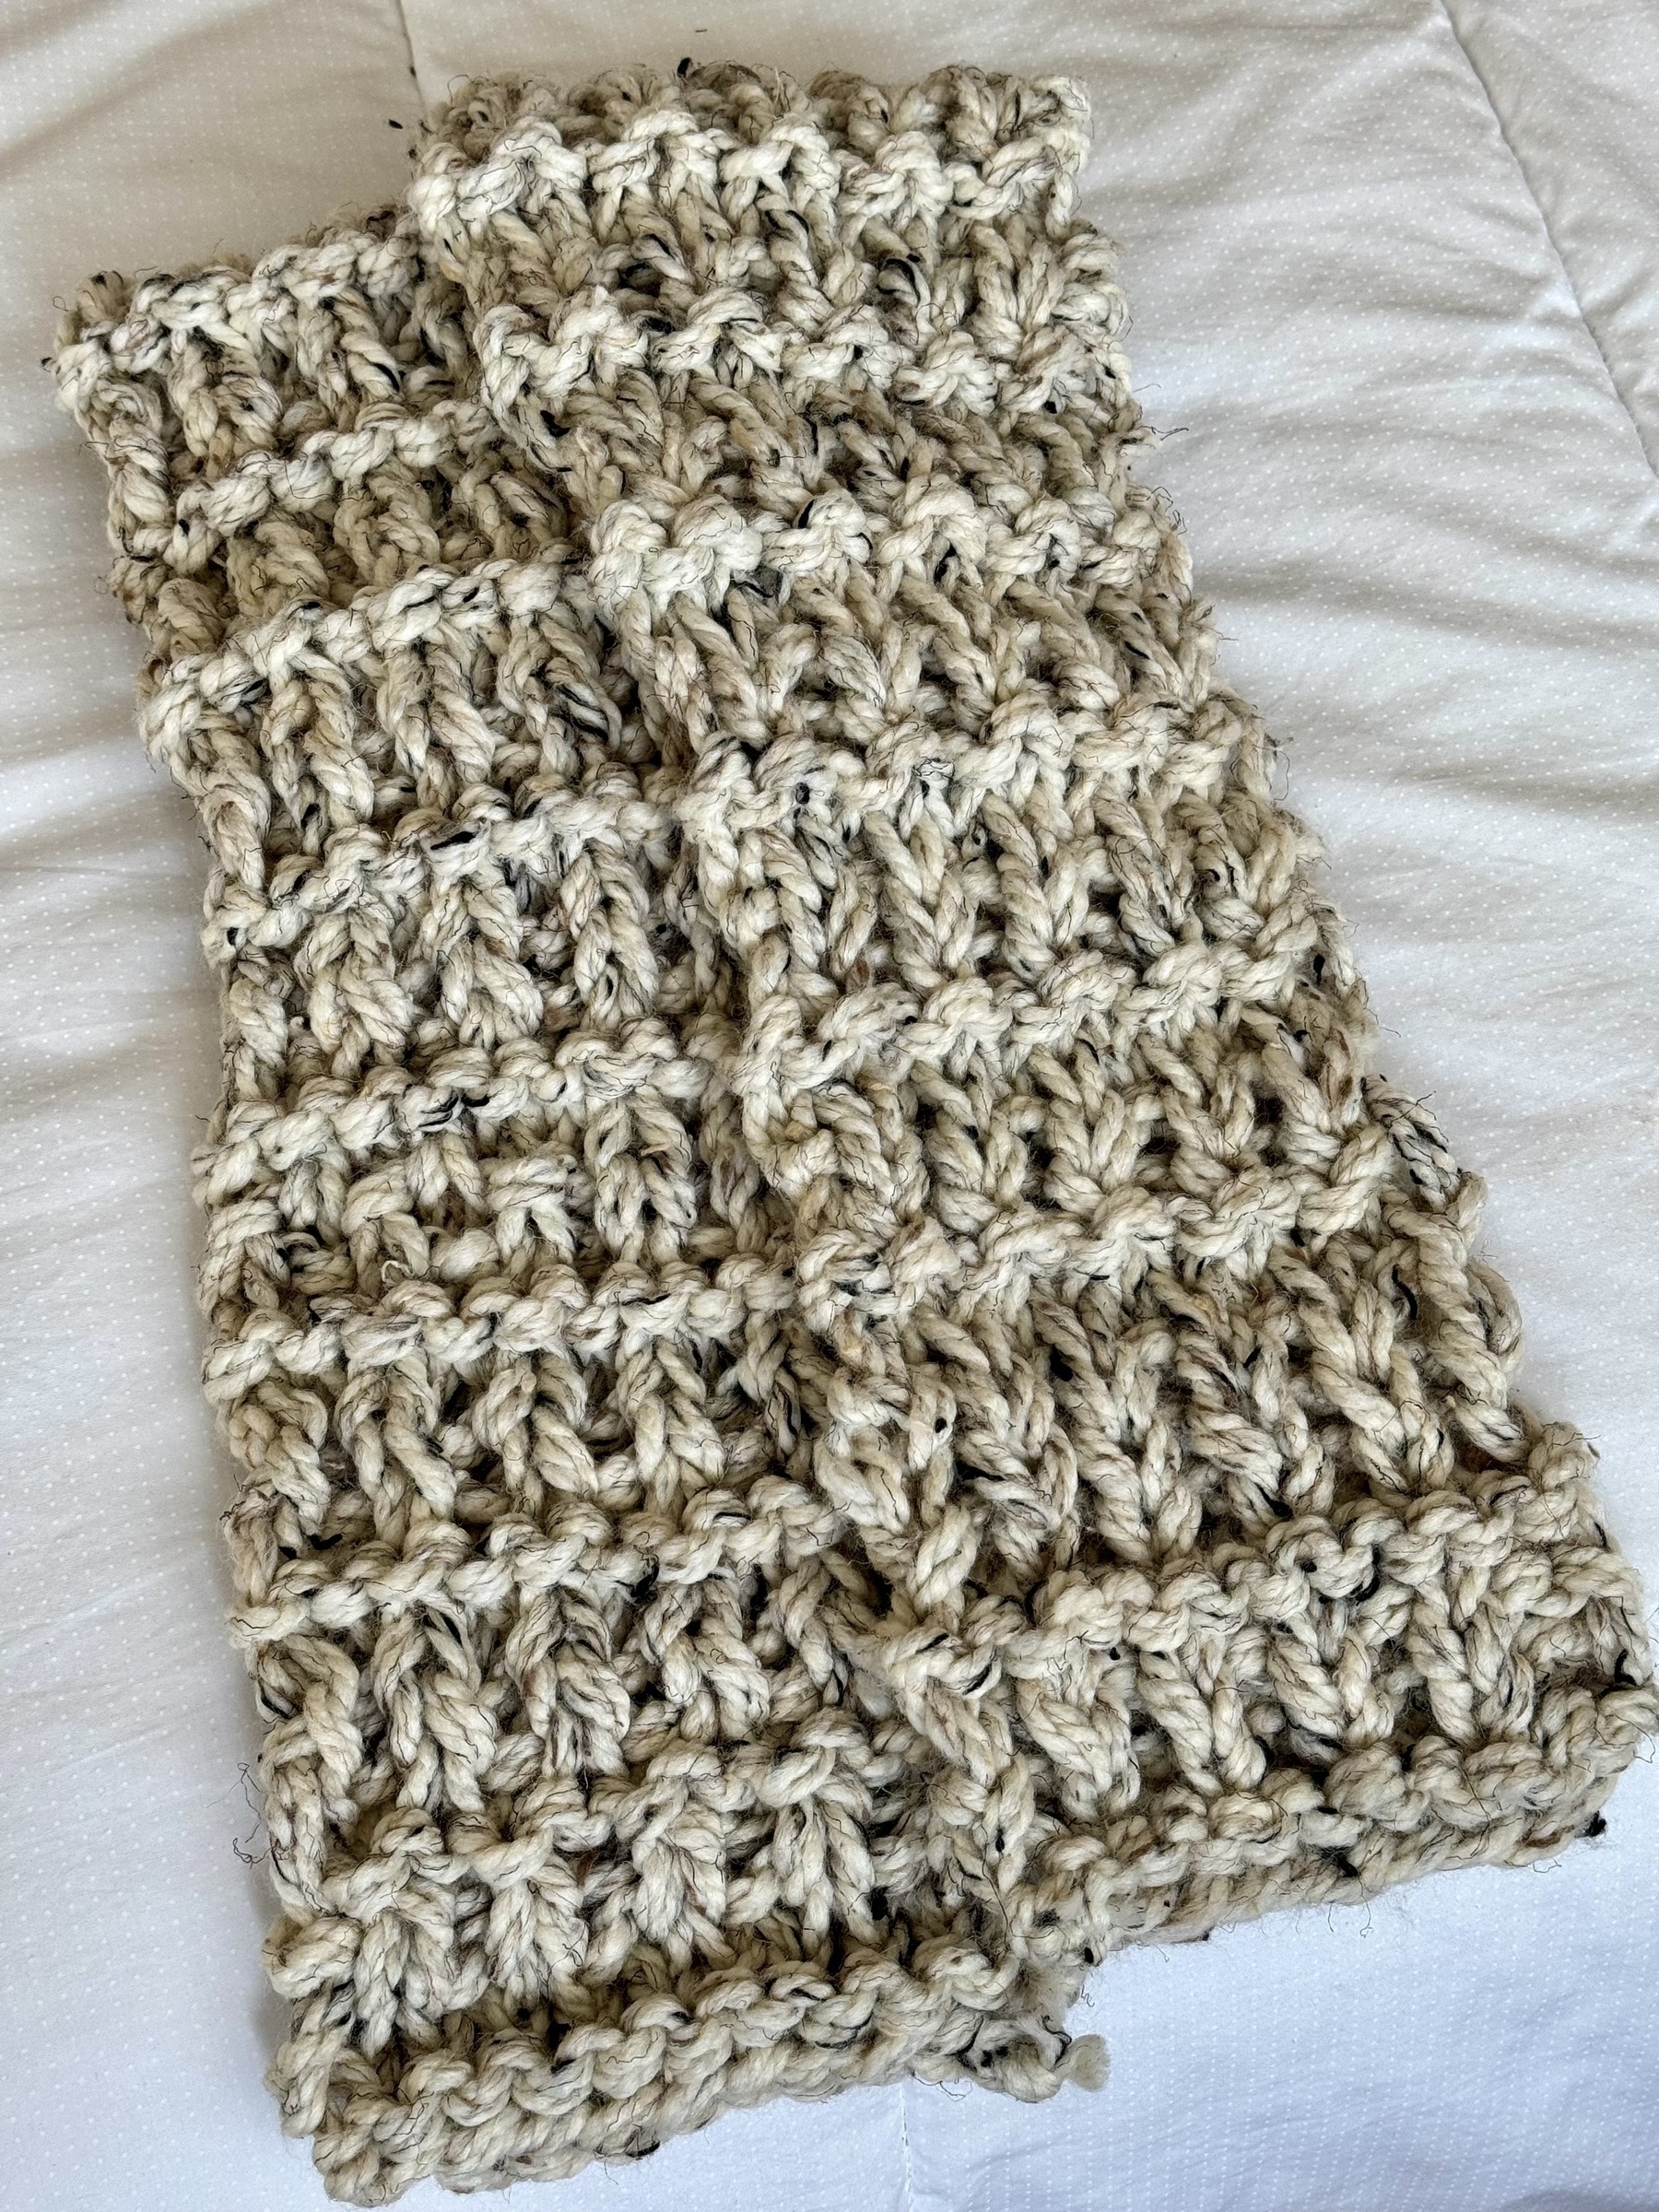 A knitted scarf